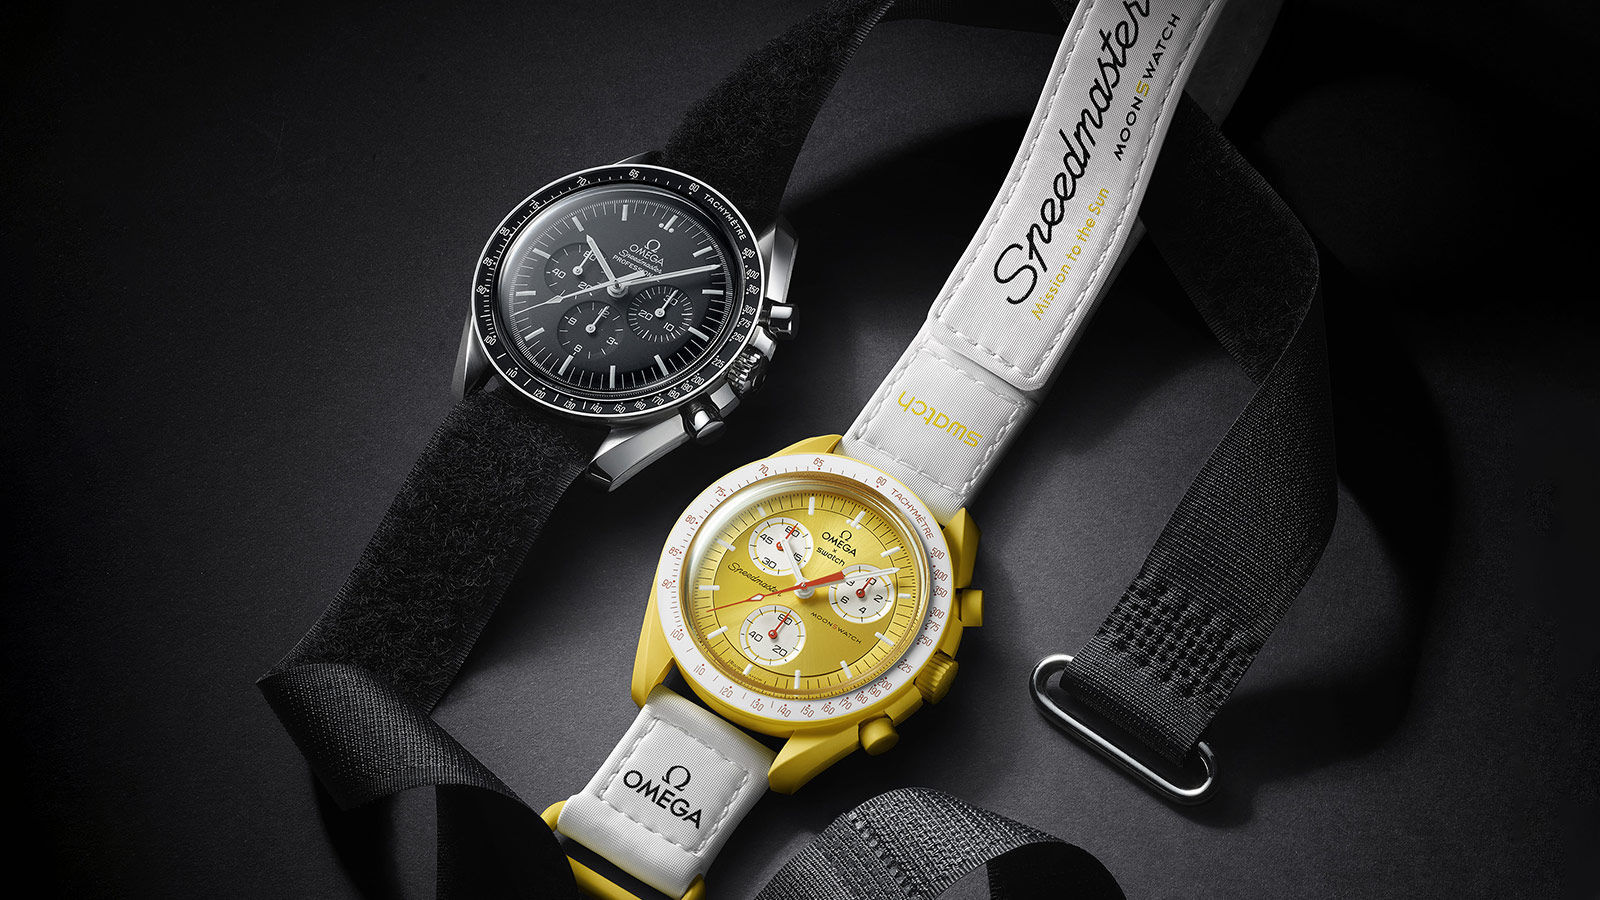 Omega x Swatch MoonSwatch: the Answers to the Big Questions